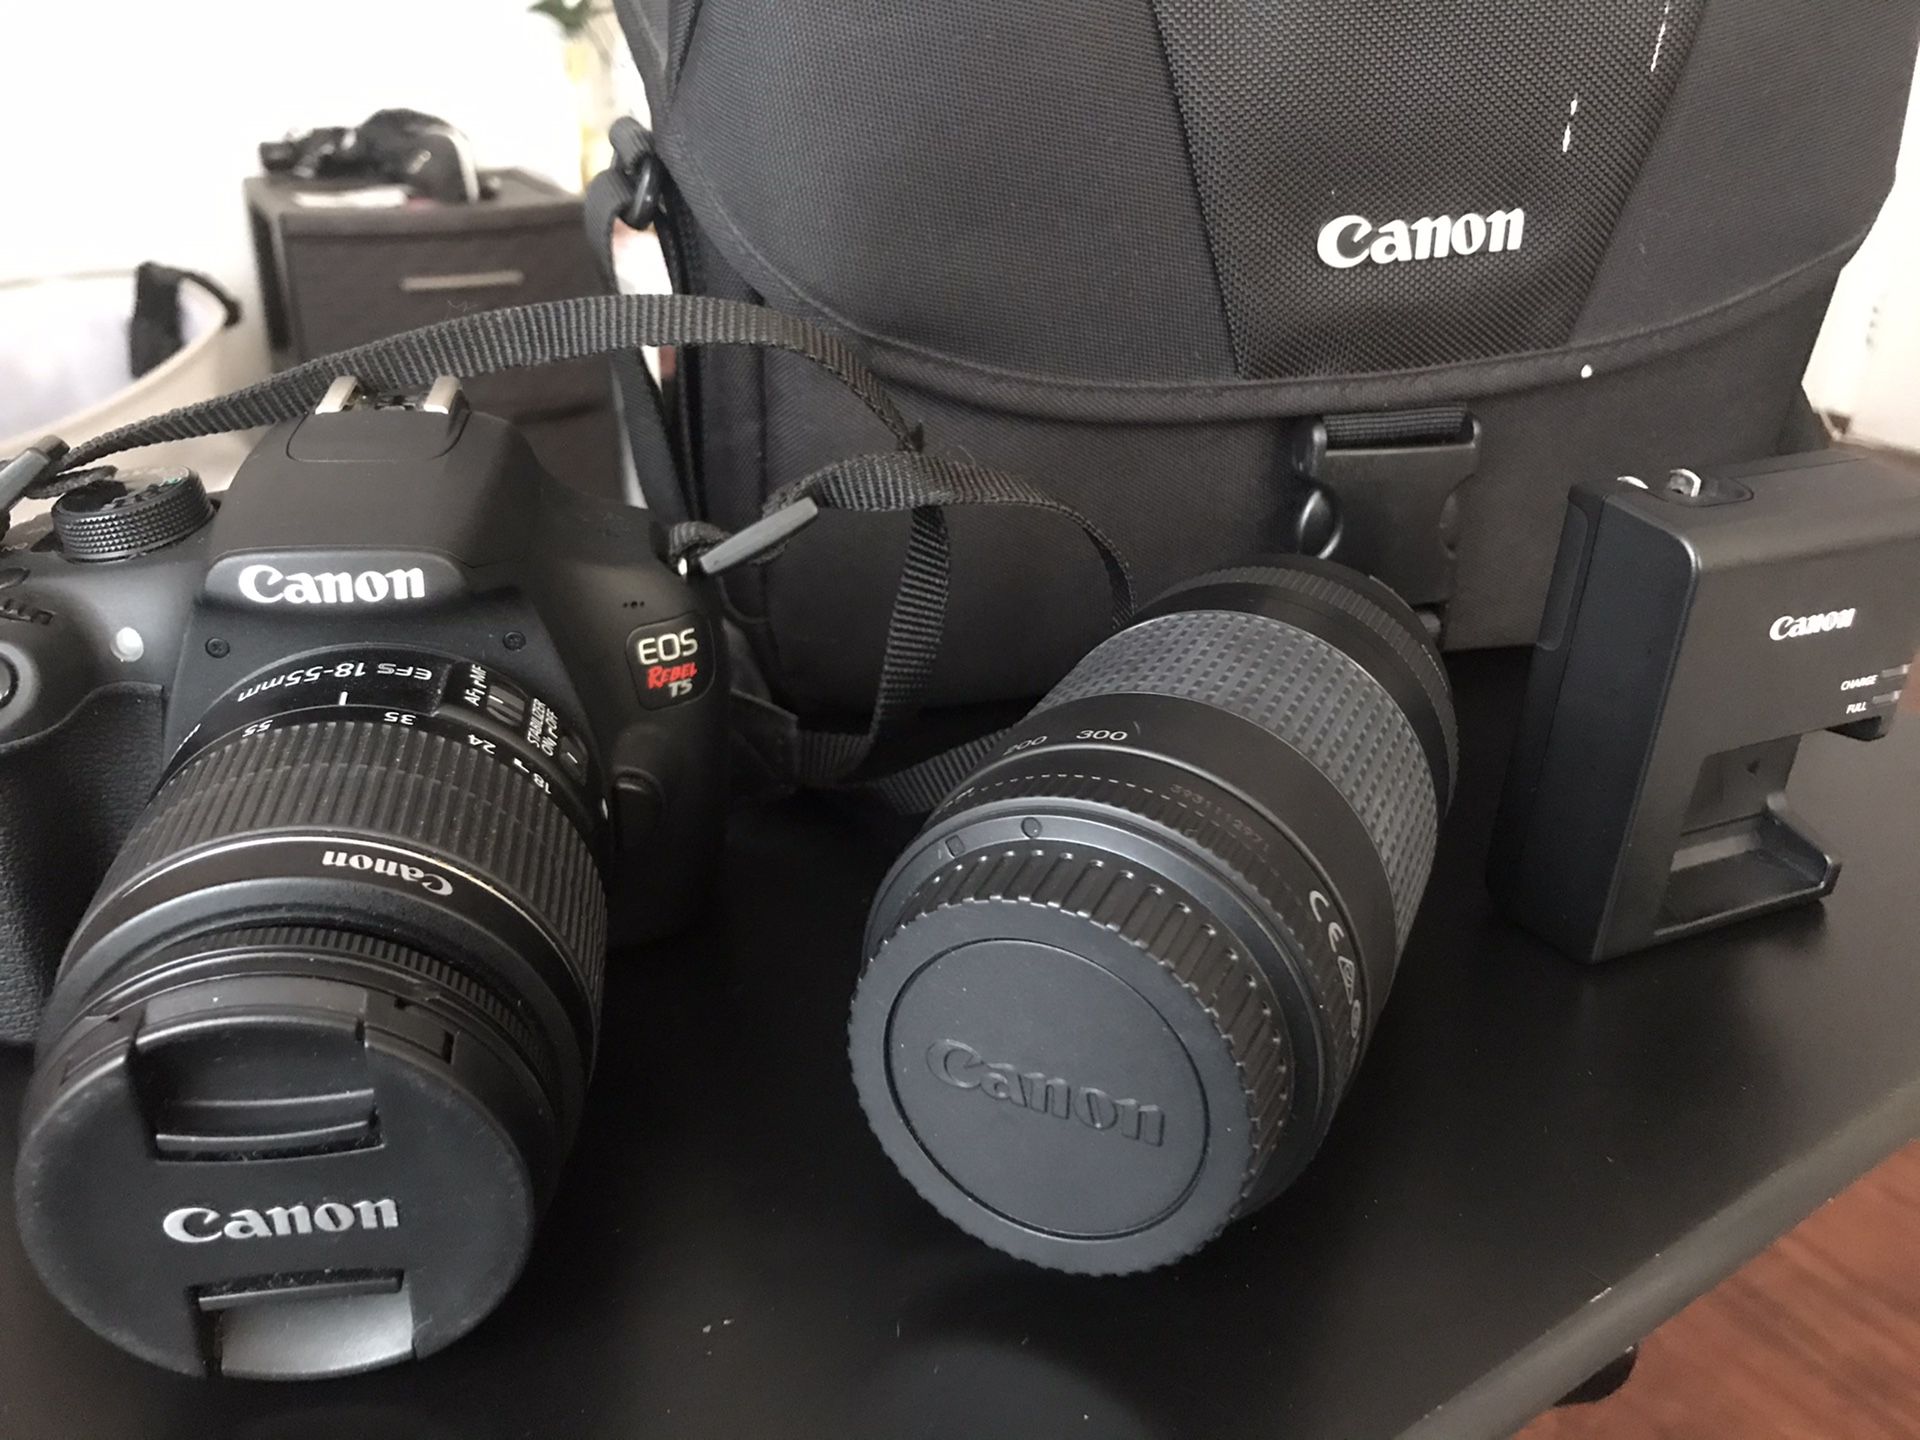 Canon EOS Rebel T5 DSLR Camera w/ 18-55mm and 75-300mm Lenses